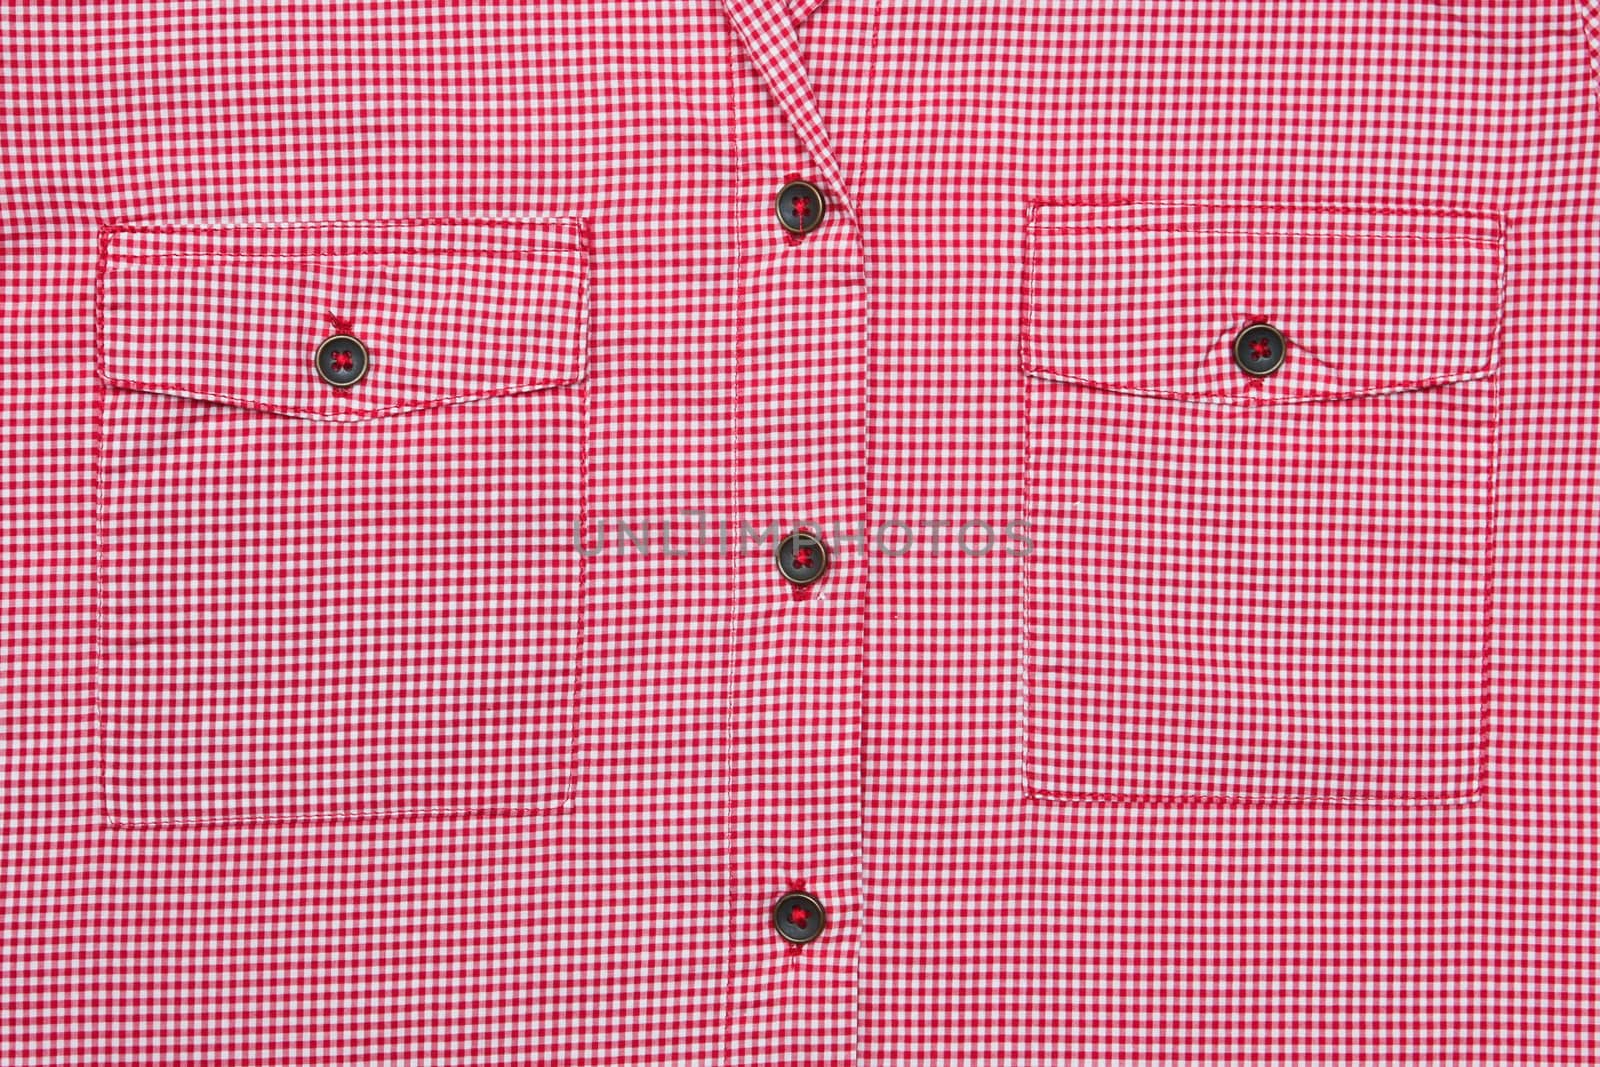 Front of a red gingham blouse showing pockets,collar and buttons